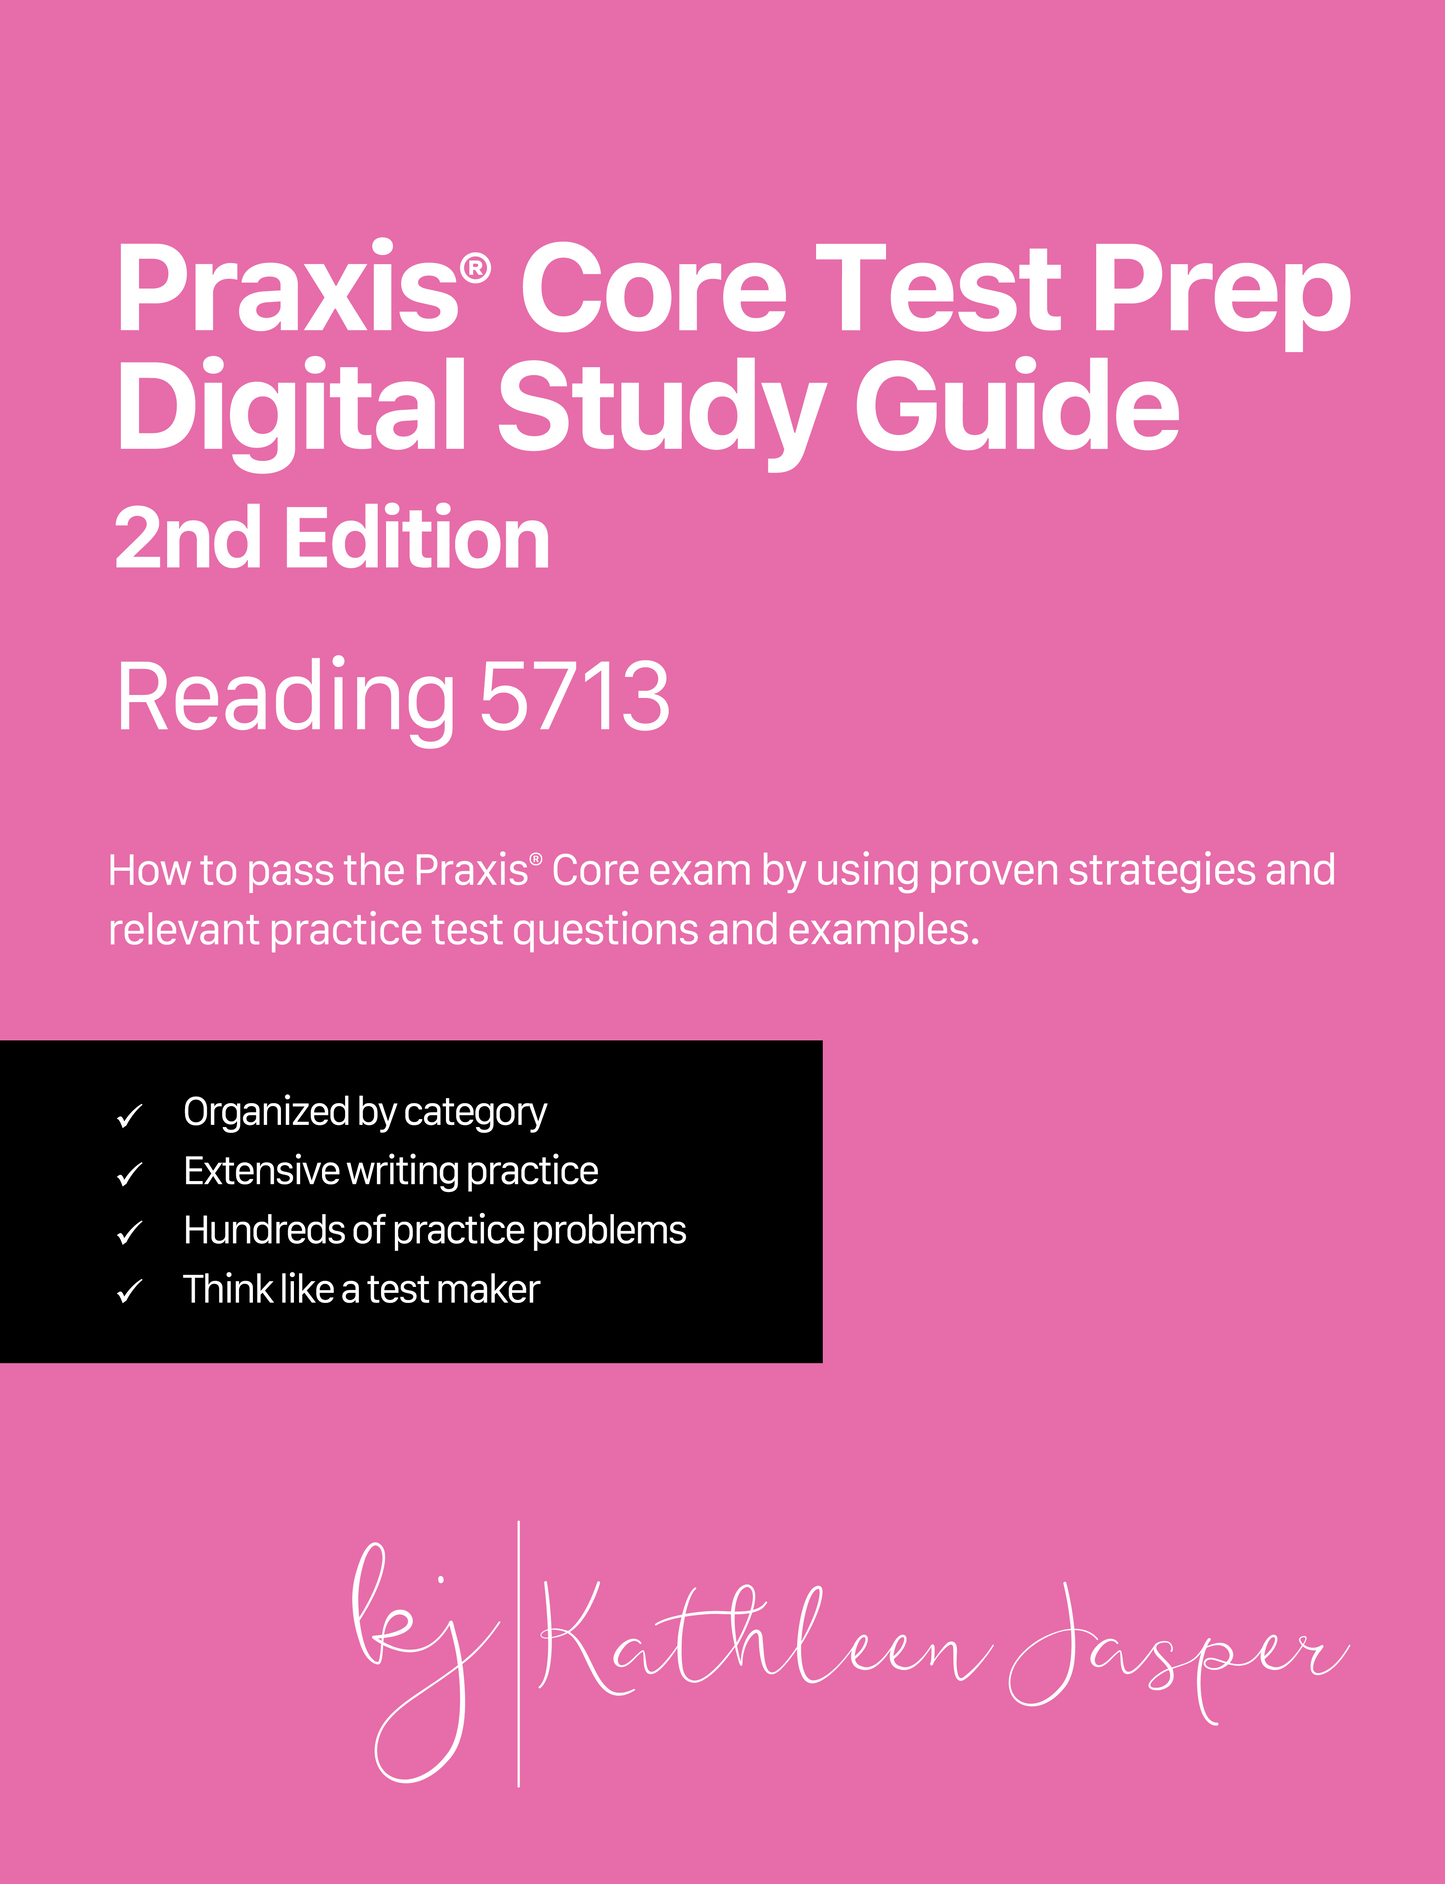 Praxis Core 2nd Edition - Digital Study Guides and Practice Tests